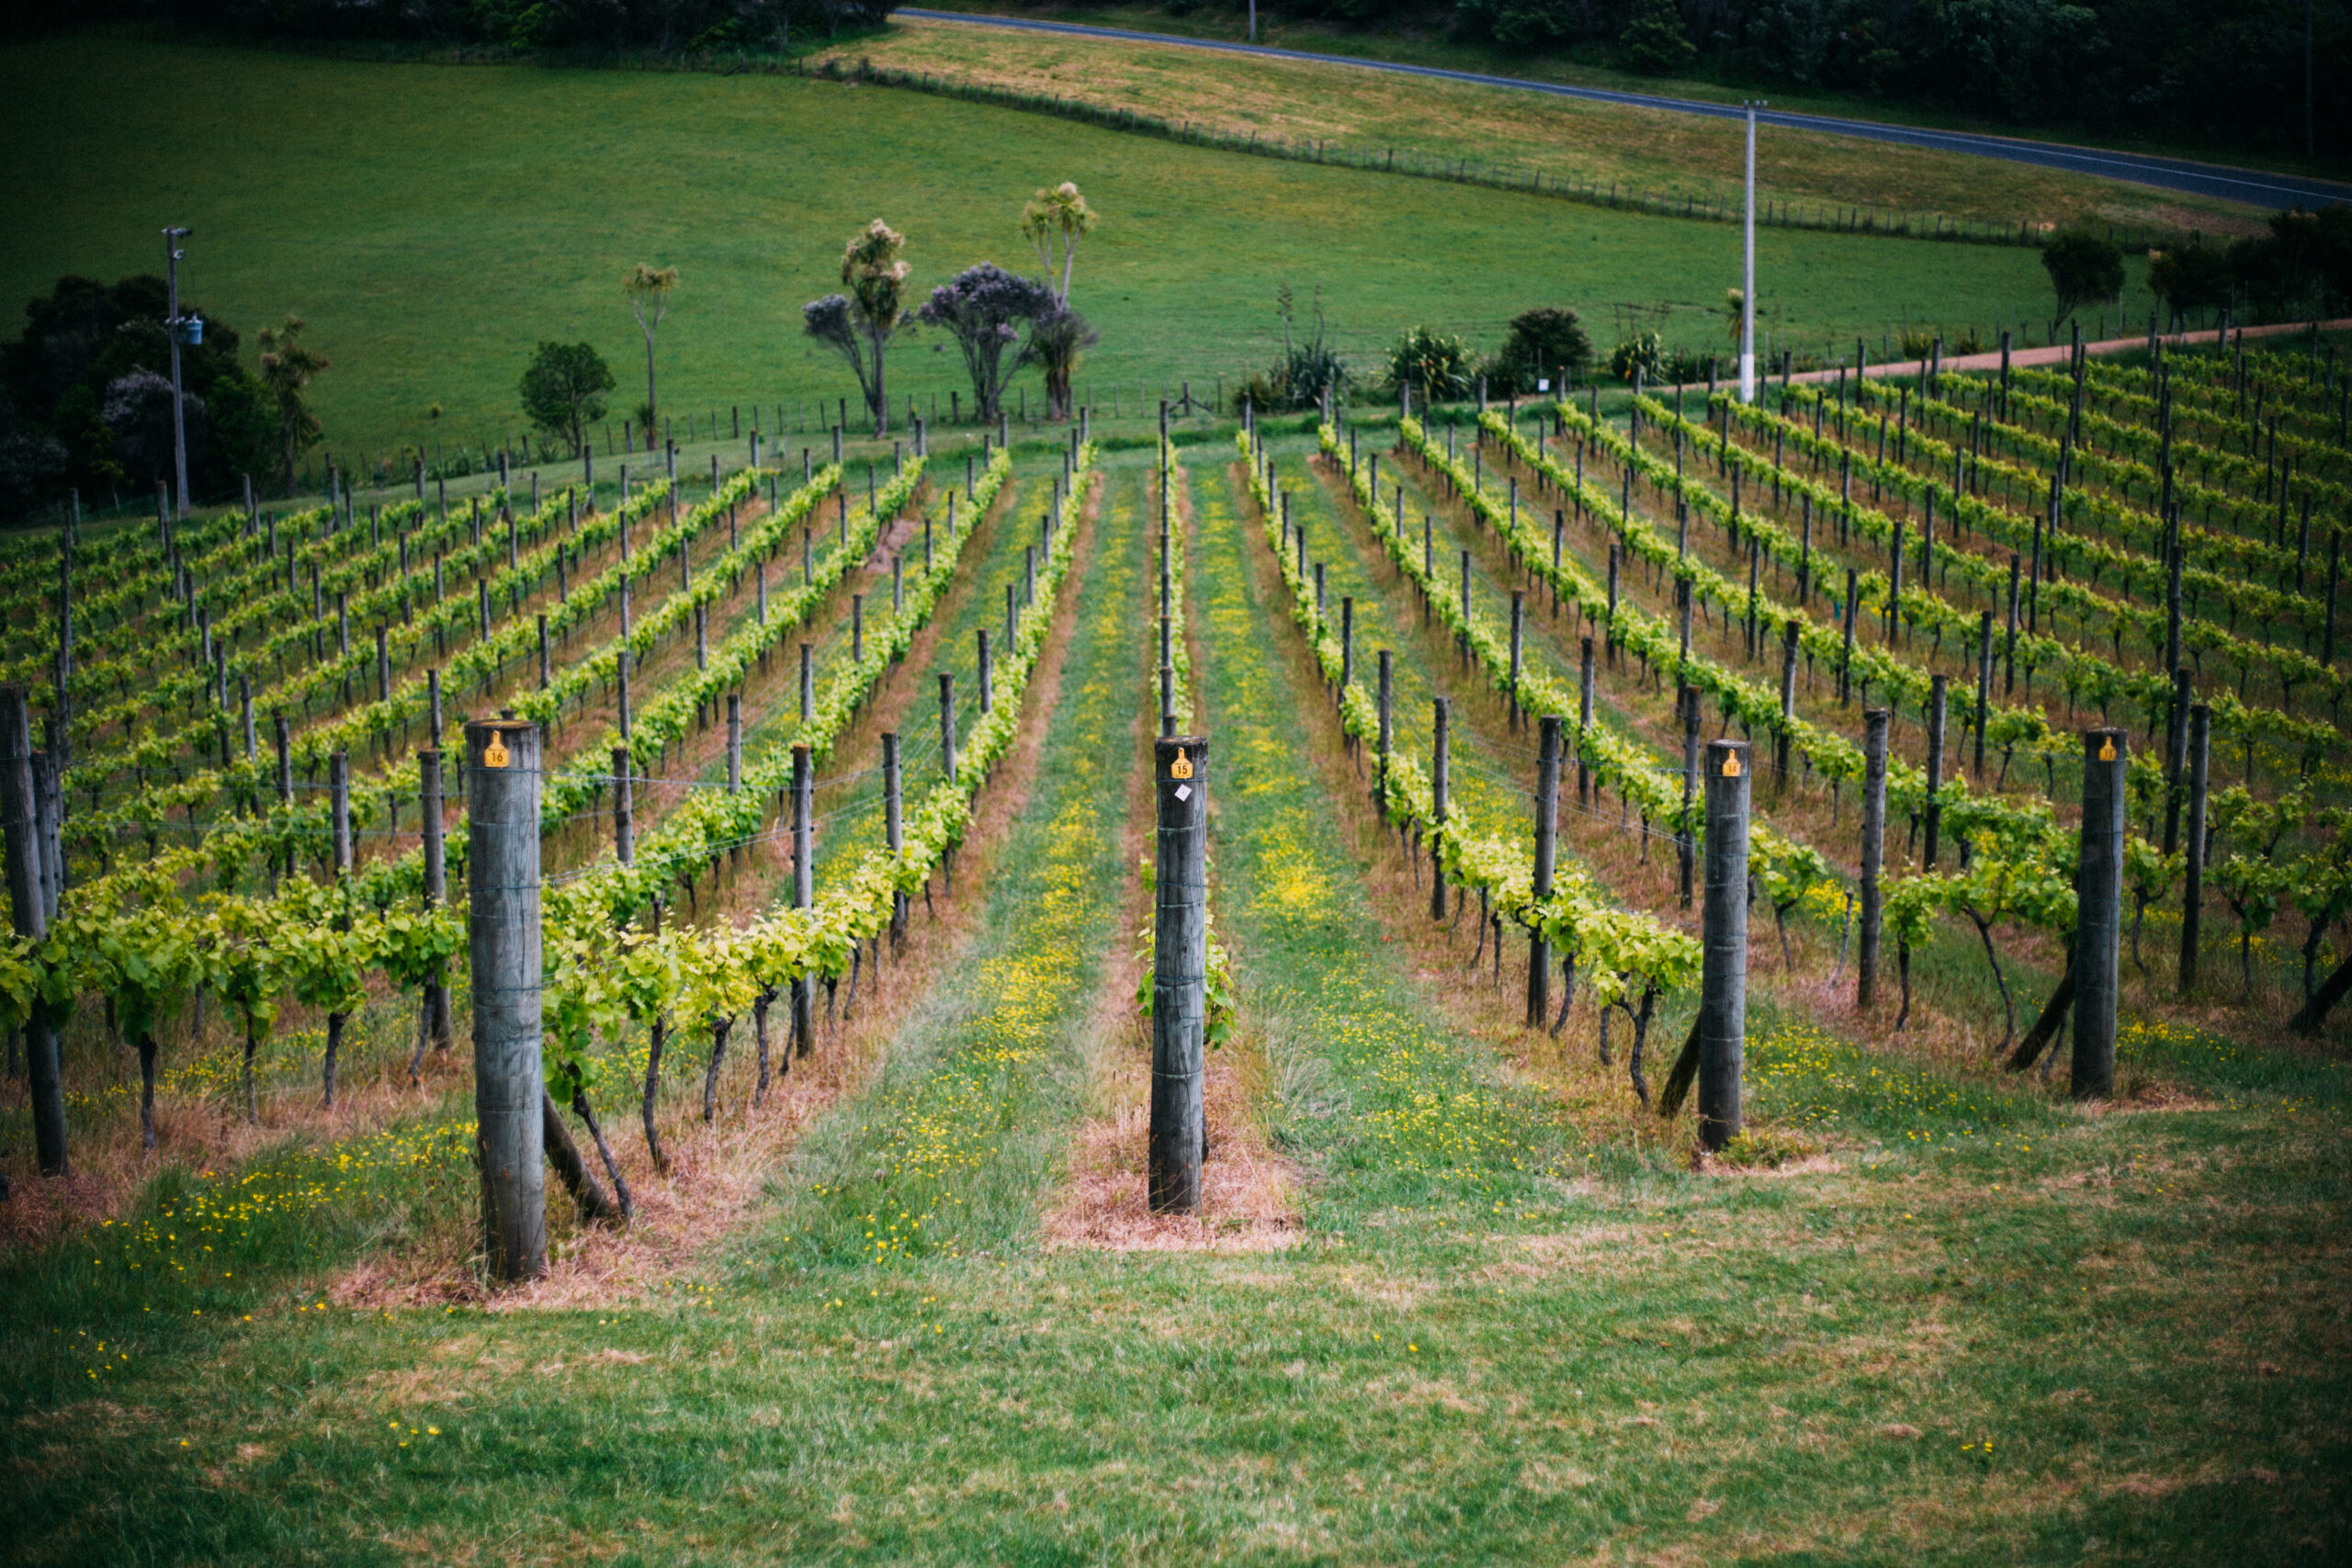 A lush vineyard with rows of grapevines stretches into the distance on an inclined landscape. The vines are supported by wooden posts, and the surrounding area is green with grass and trees. A road is visible in the background, lining the vineyard.